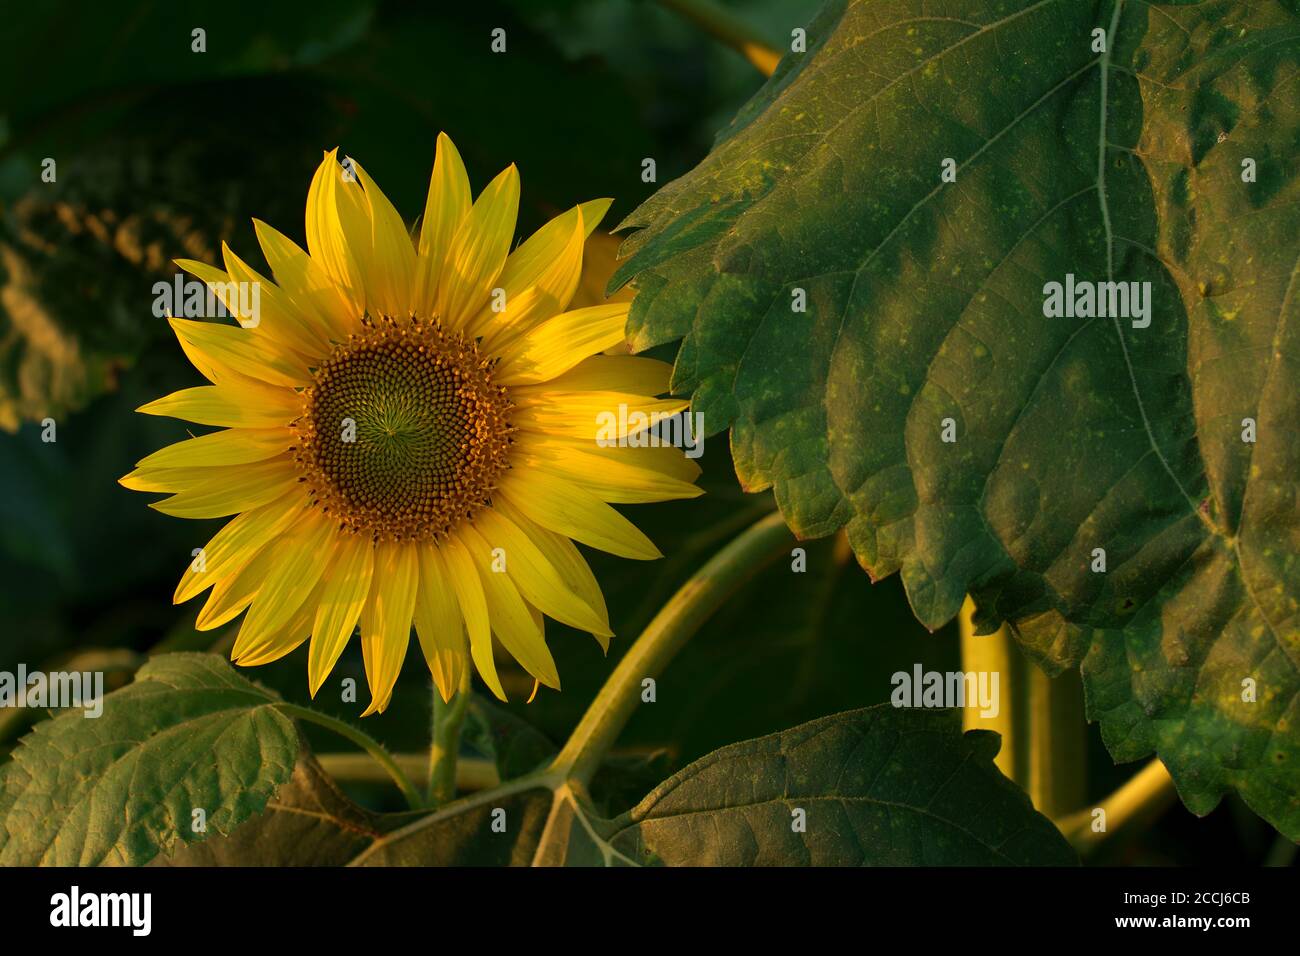 Sunflower head and it's stem with leaves, at sunset. There are visible ray flowers, and unopened and opened disk florets in a female phase. Stock Photo